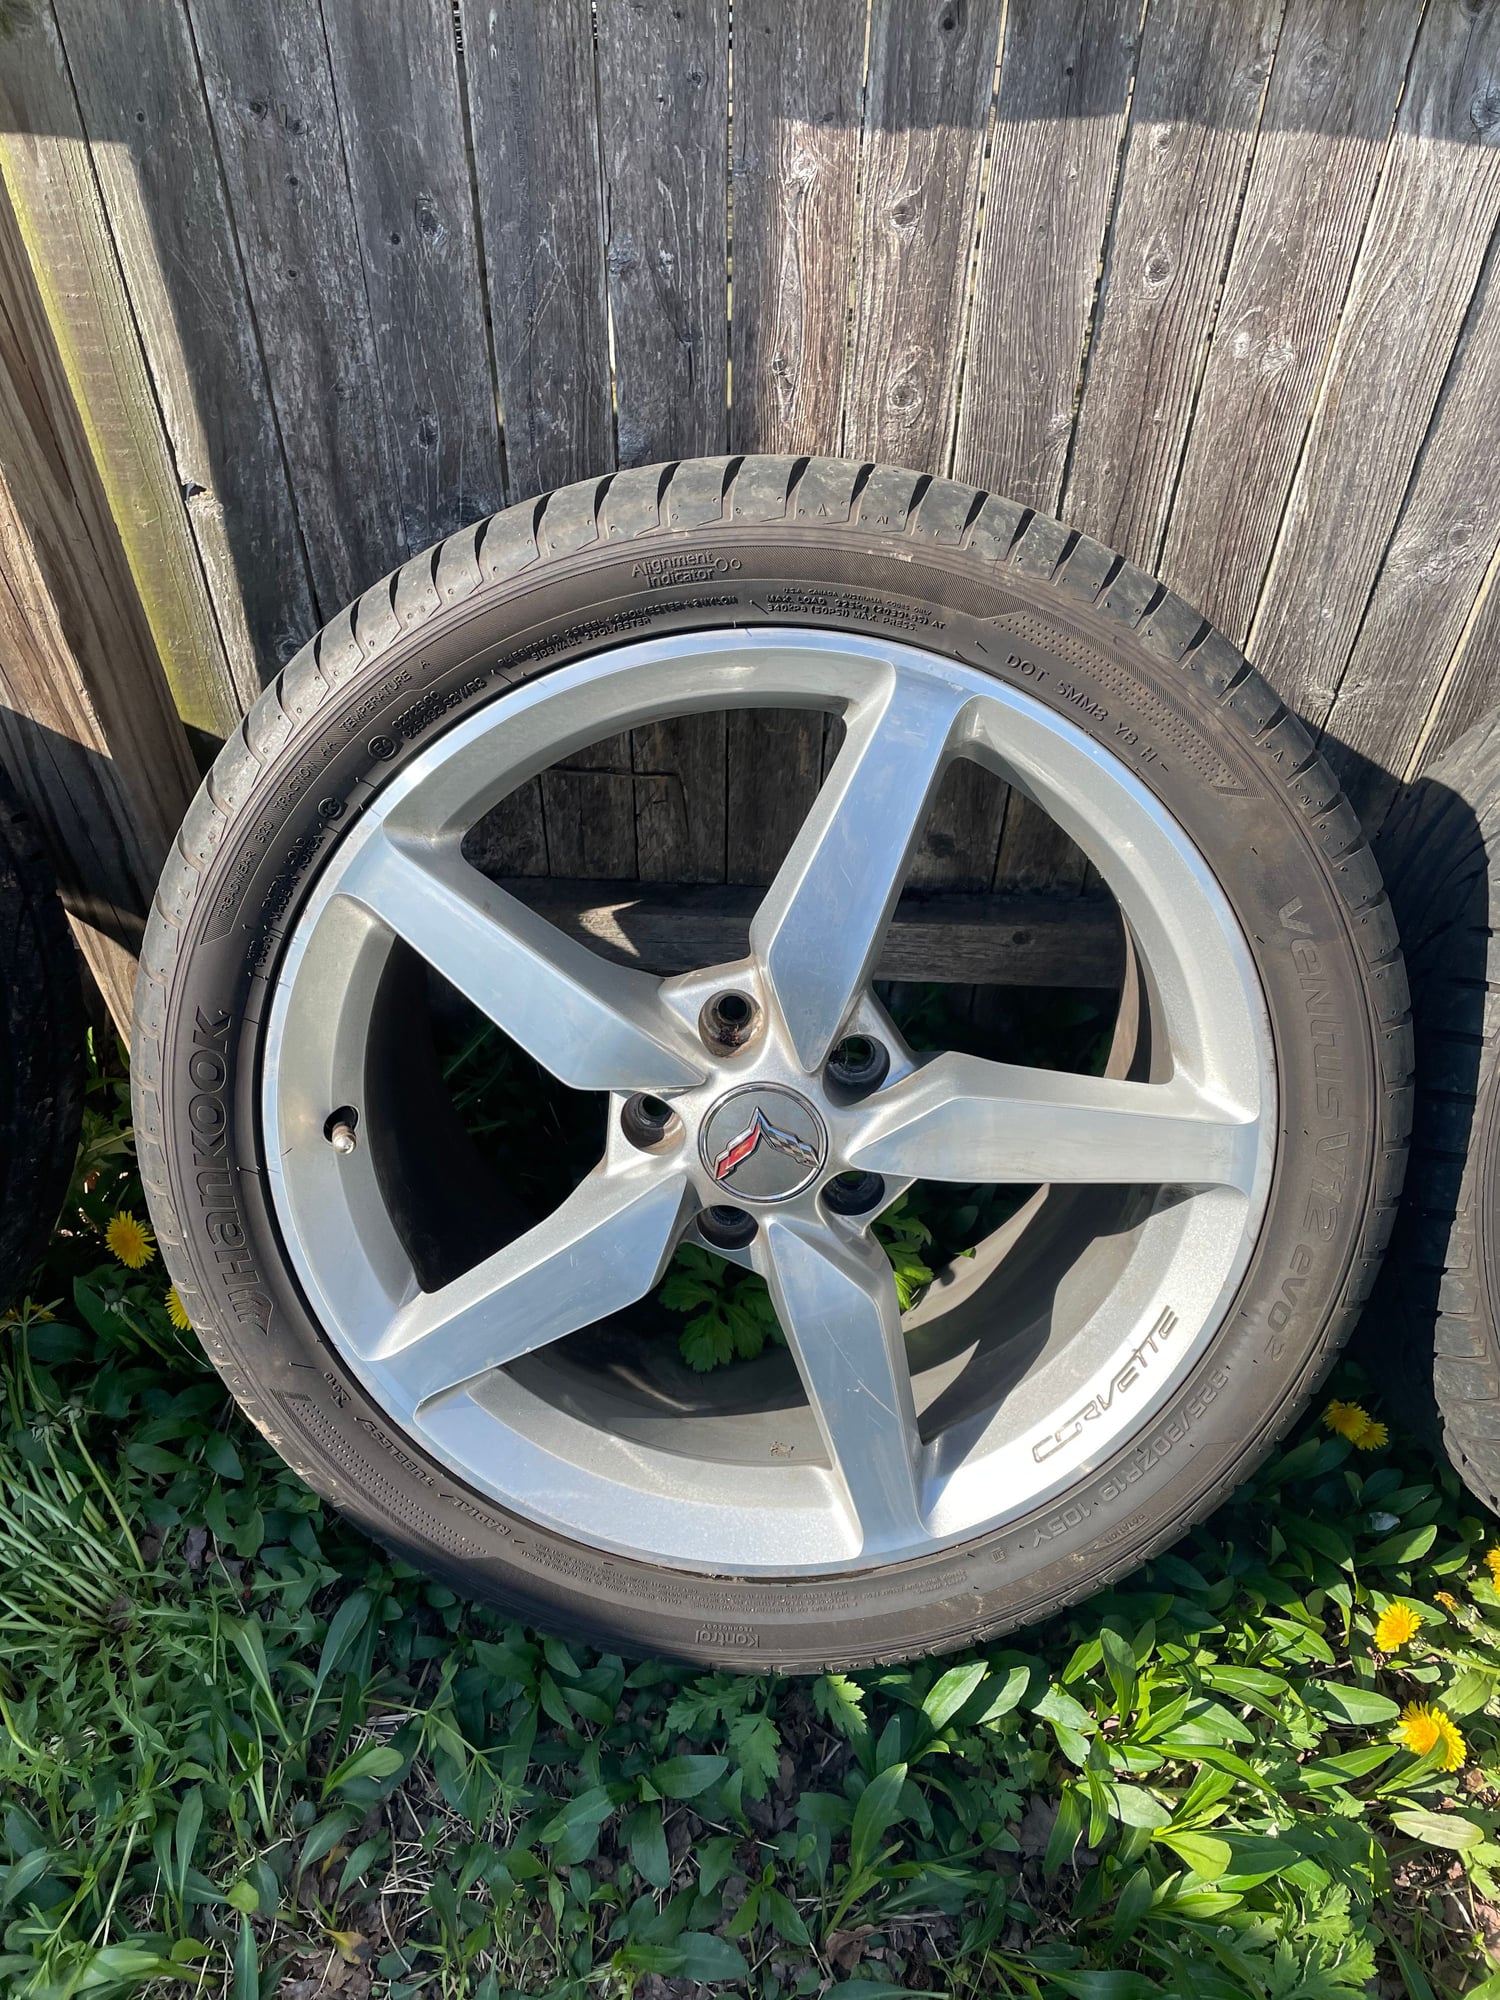 Wheels and Tires/Axles - C6 rims and tires - Used - 2005 to 2013 Chevrolet Corvette - Massapequa, NY 11758, United States